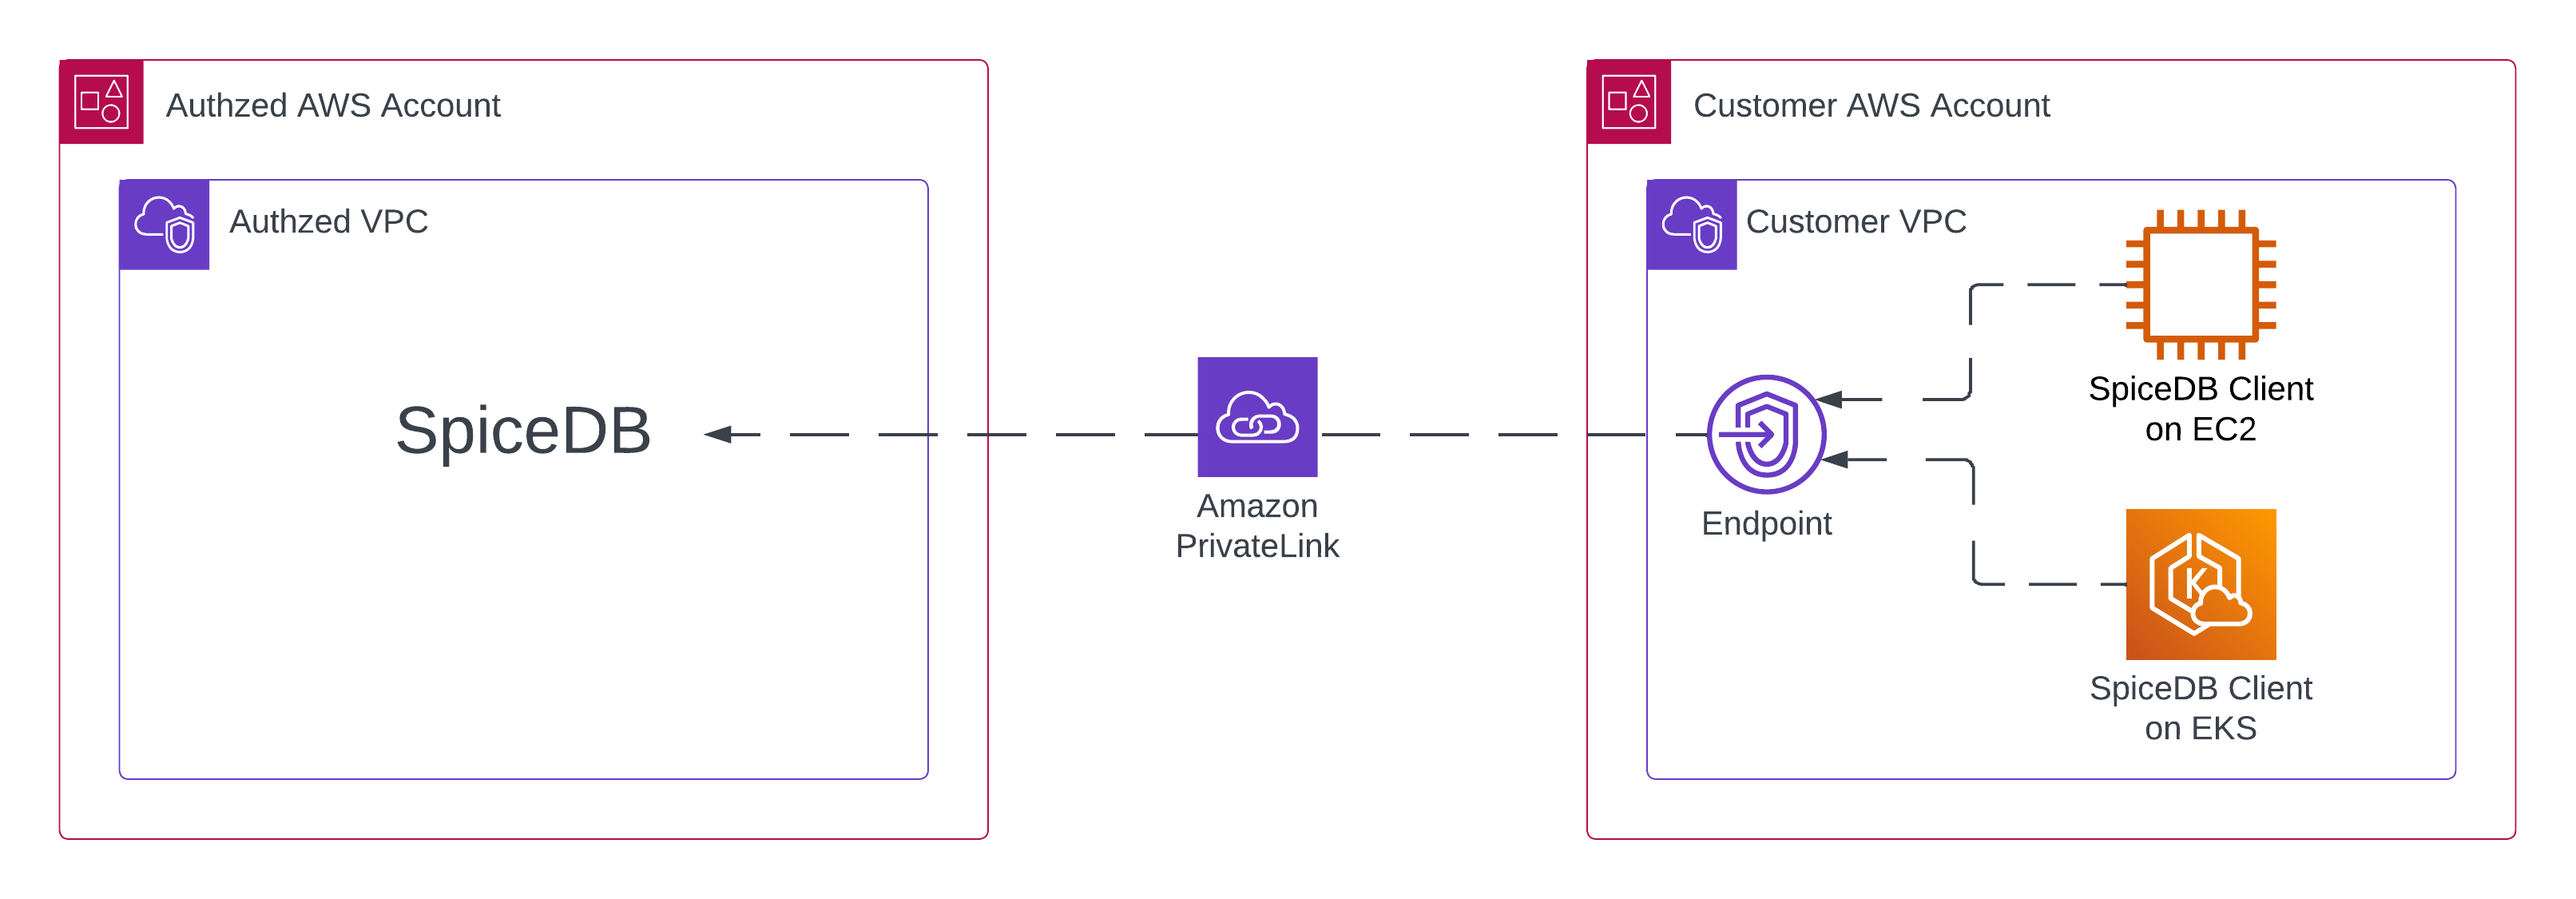 Diagram displaying PrivateLink connecting AWS accounts